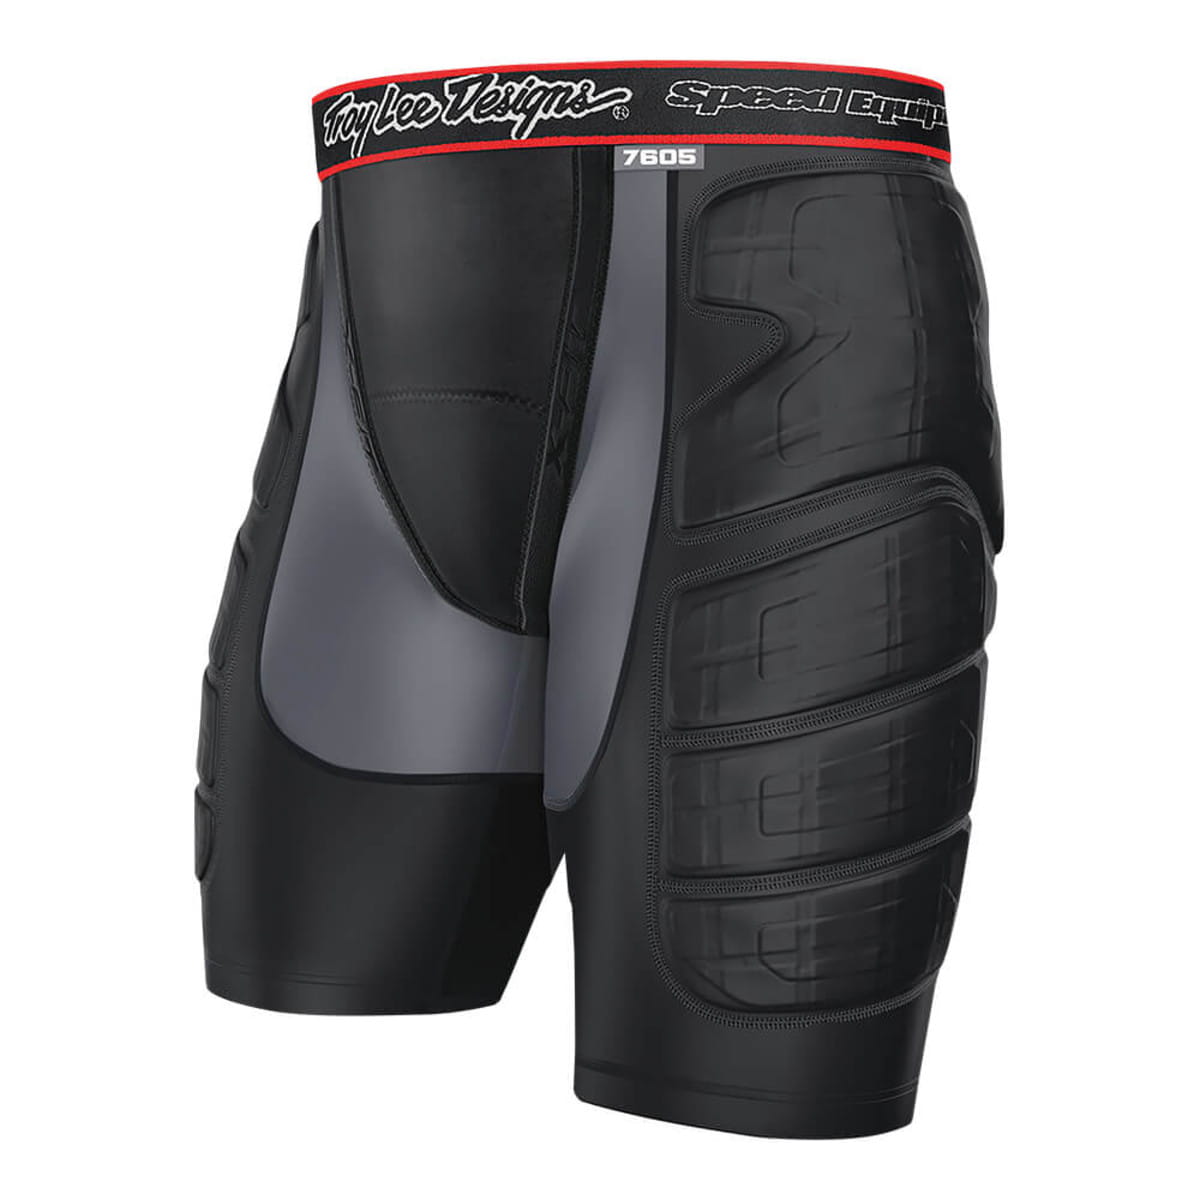 LPS 7605 Short - Protector shorts | Protector Pants | Body Armor